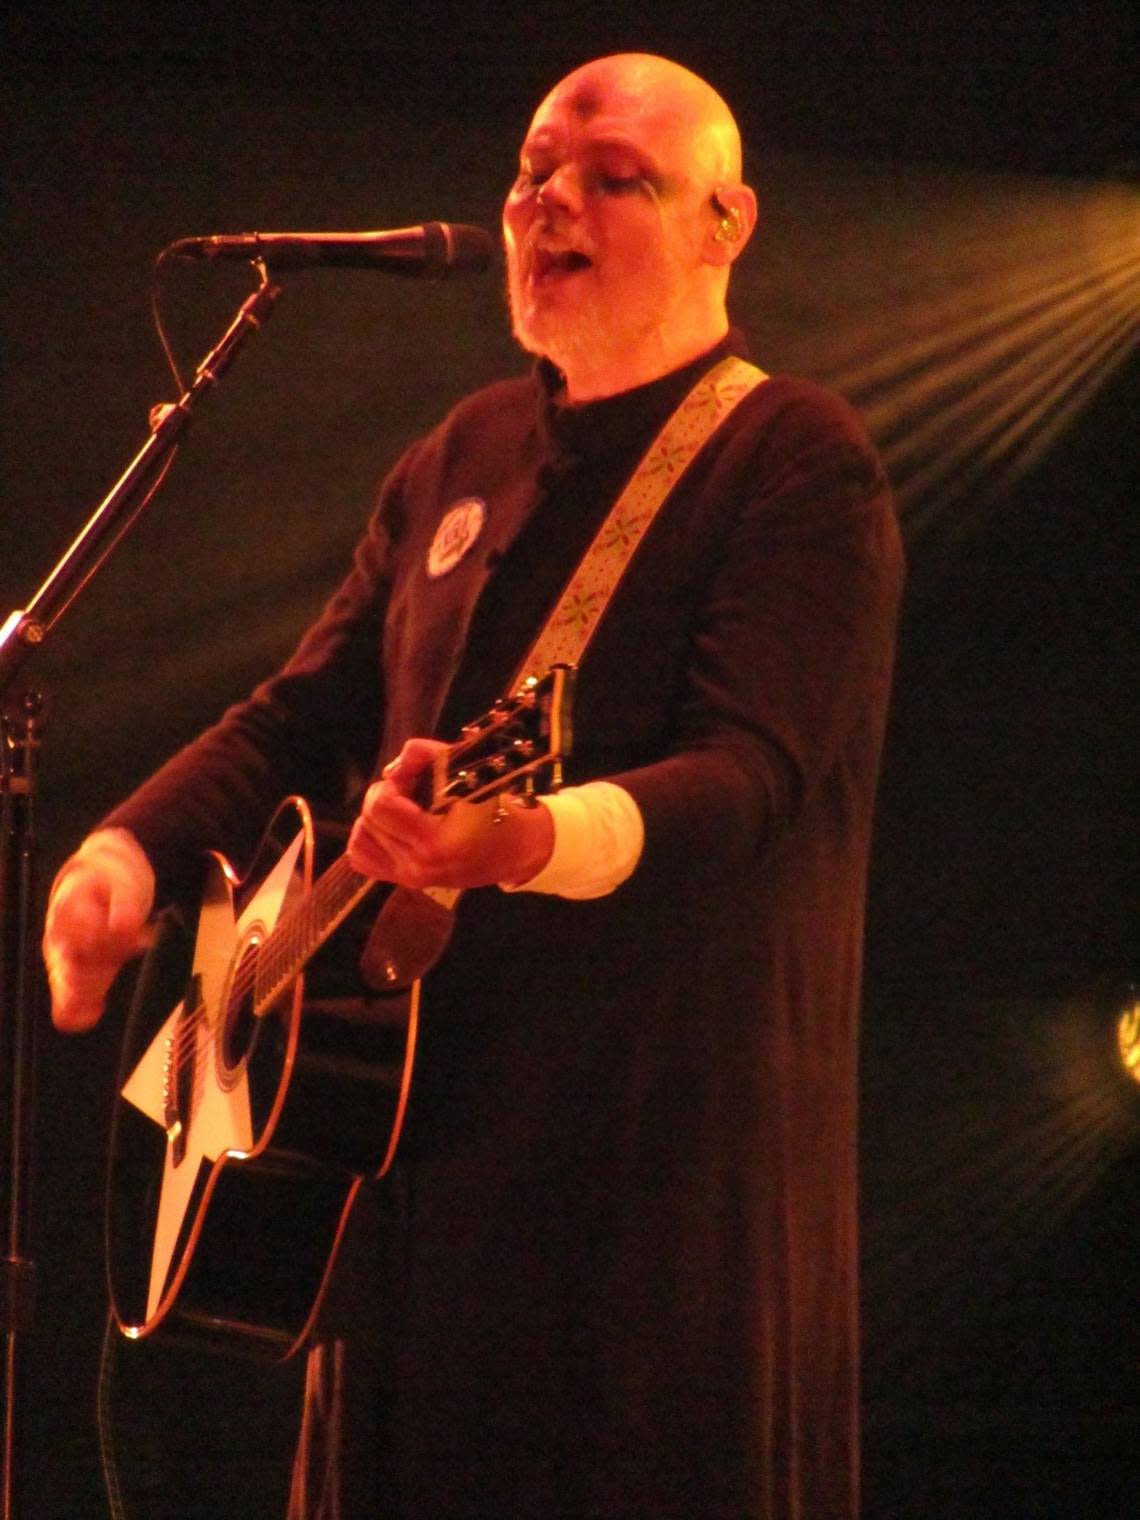 Billy Corgan at a rock-n-wrestling show, featuring his popular Smashing Pumpkins band and his popular NWA pro wrestlers on Saturday, Aug. 19, 2023 during “The World is a Vampire” Tour at the iTHINK Financial Amphitheater in (South Florida) West Palm Beach.